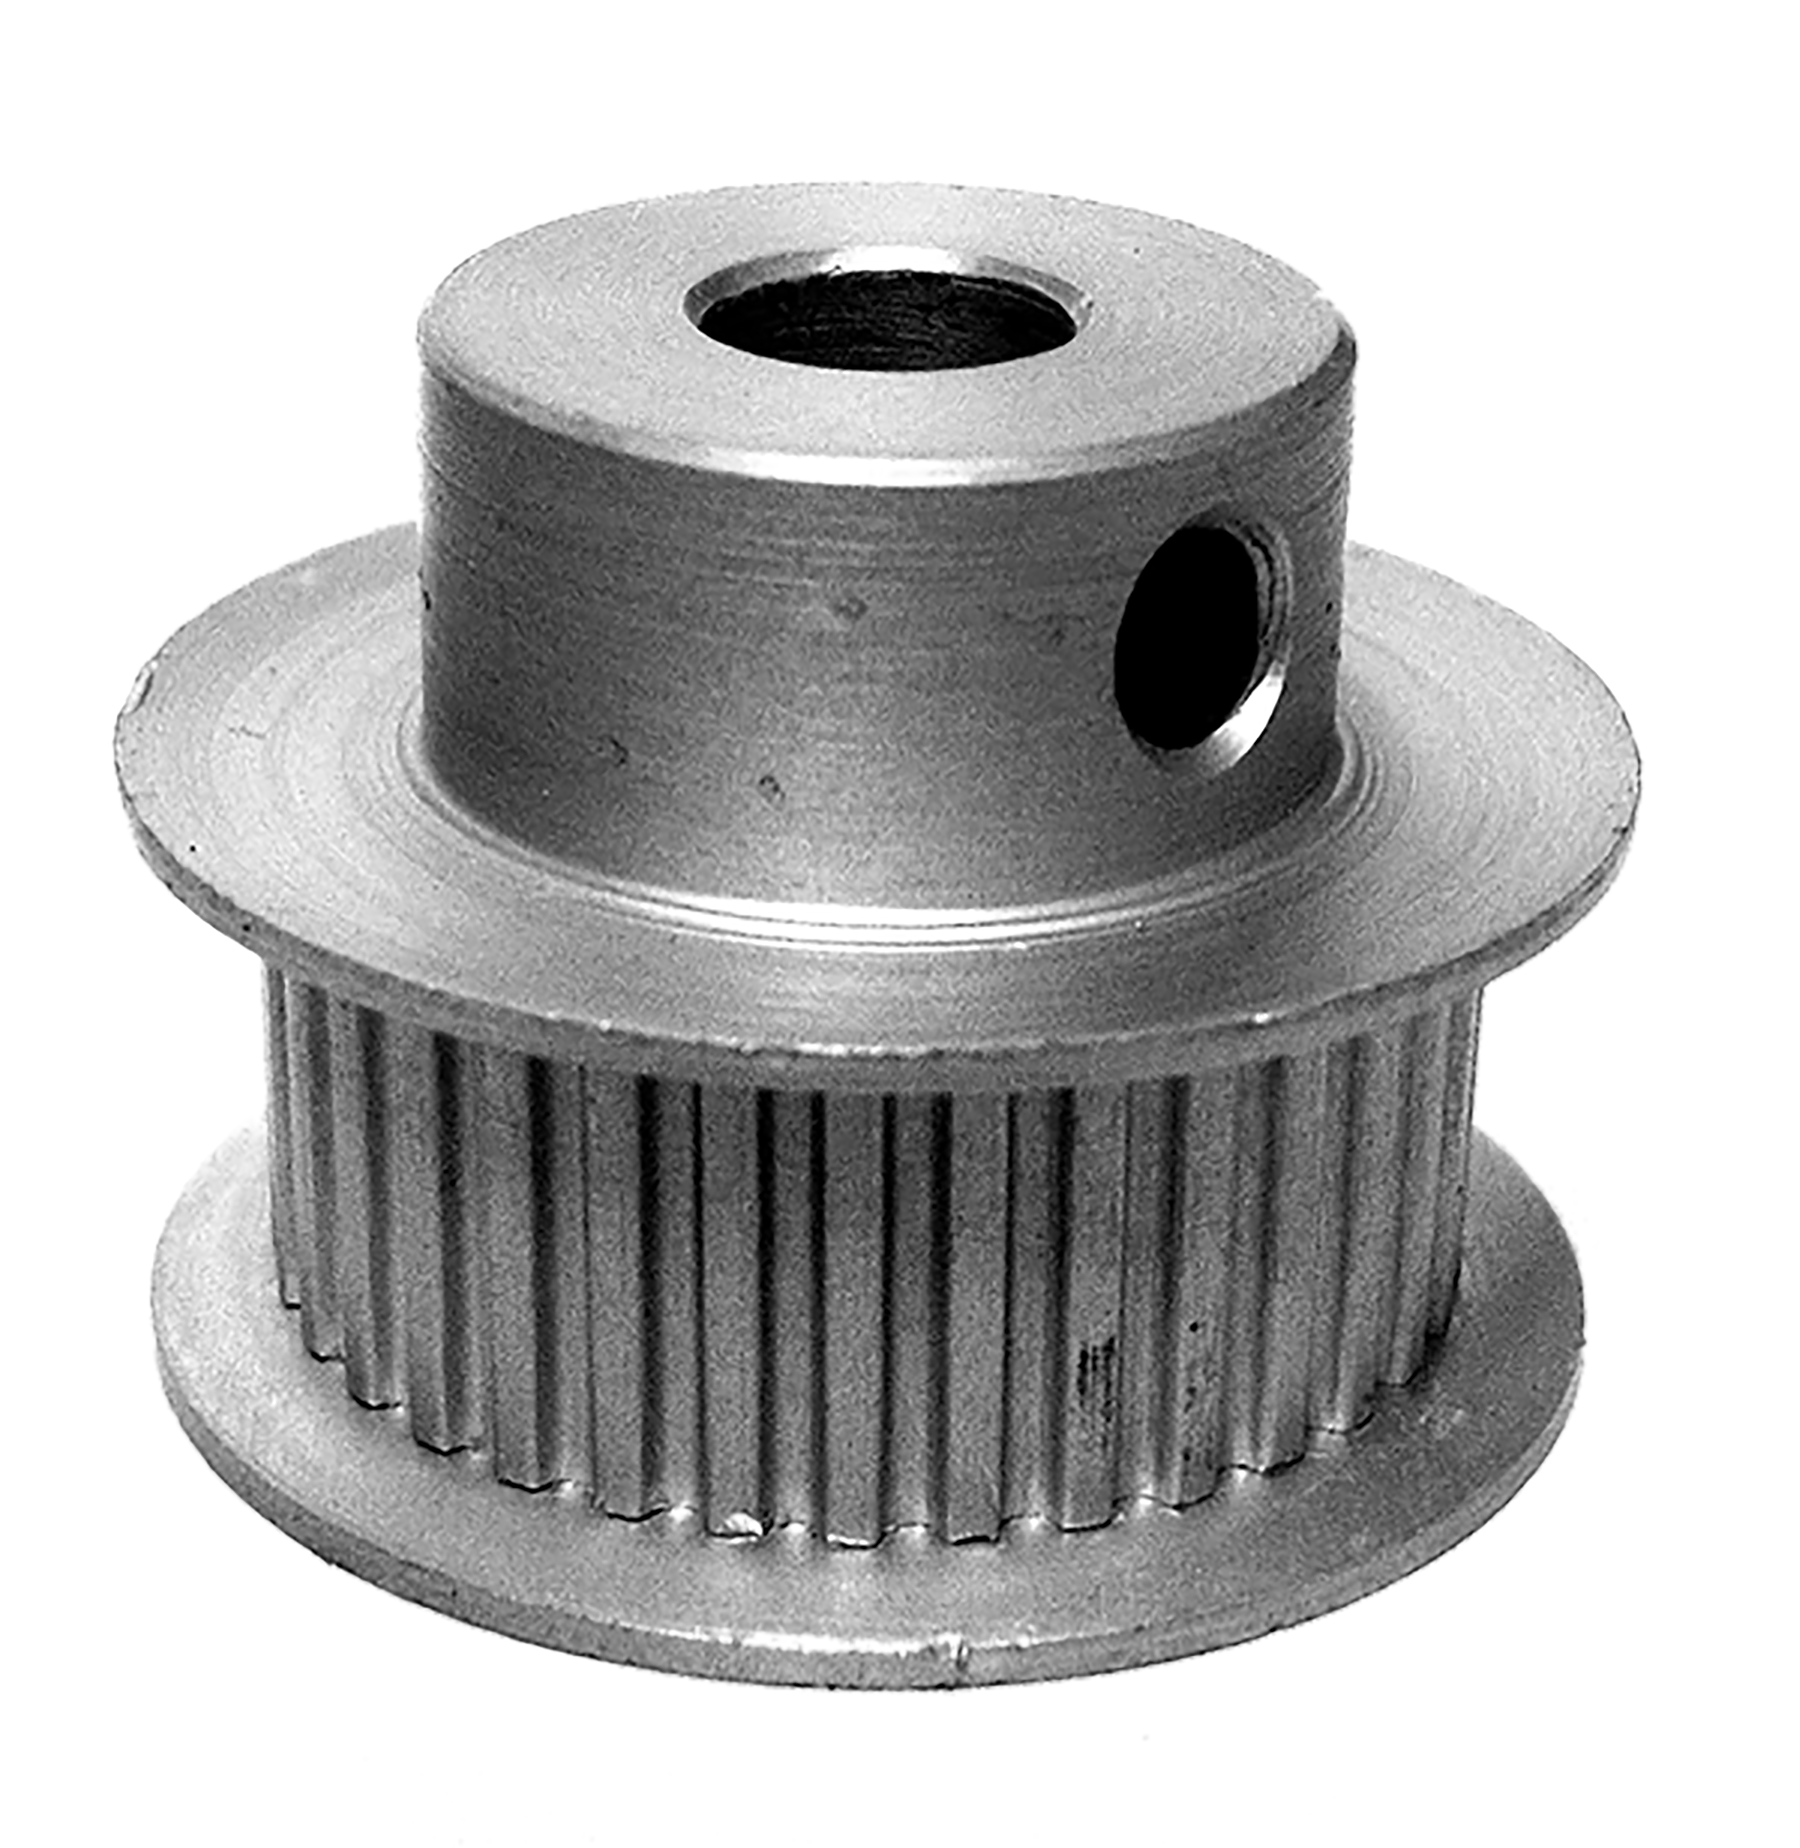 21LT312-6FA2 - Aluminum Imperial Pitch Pulleys